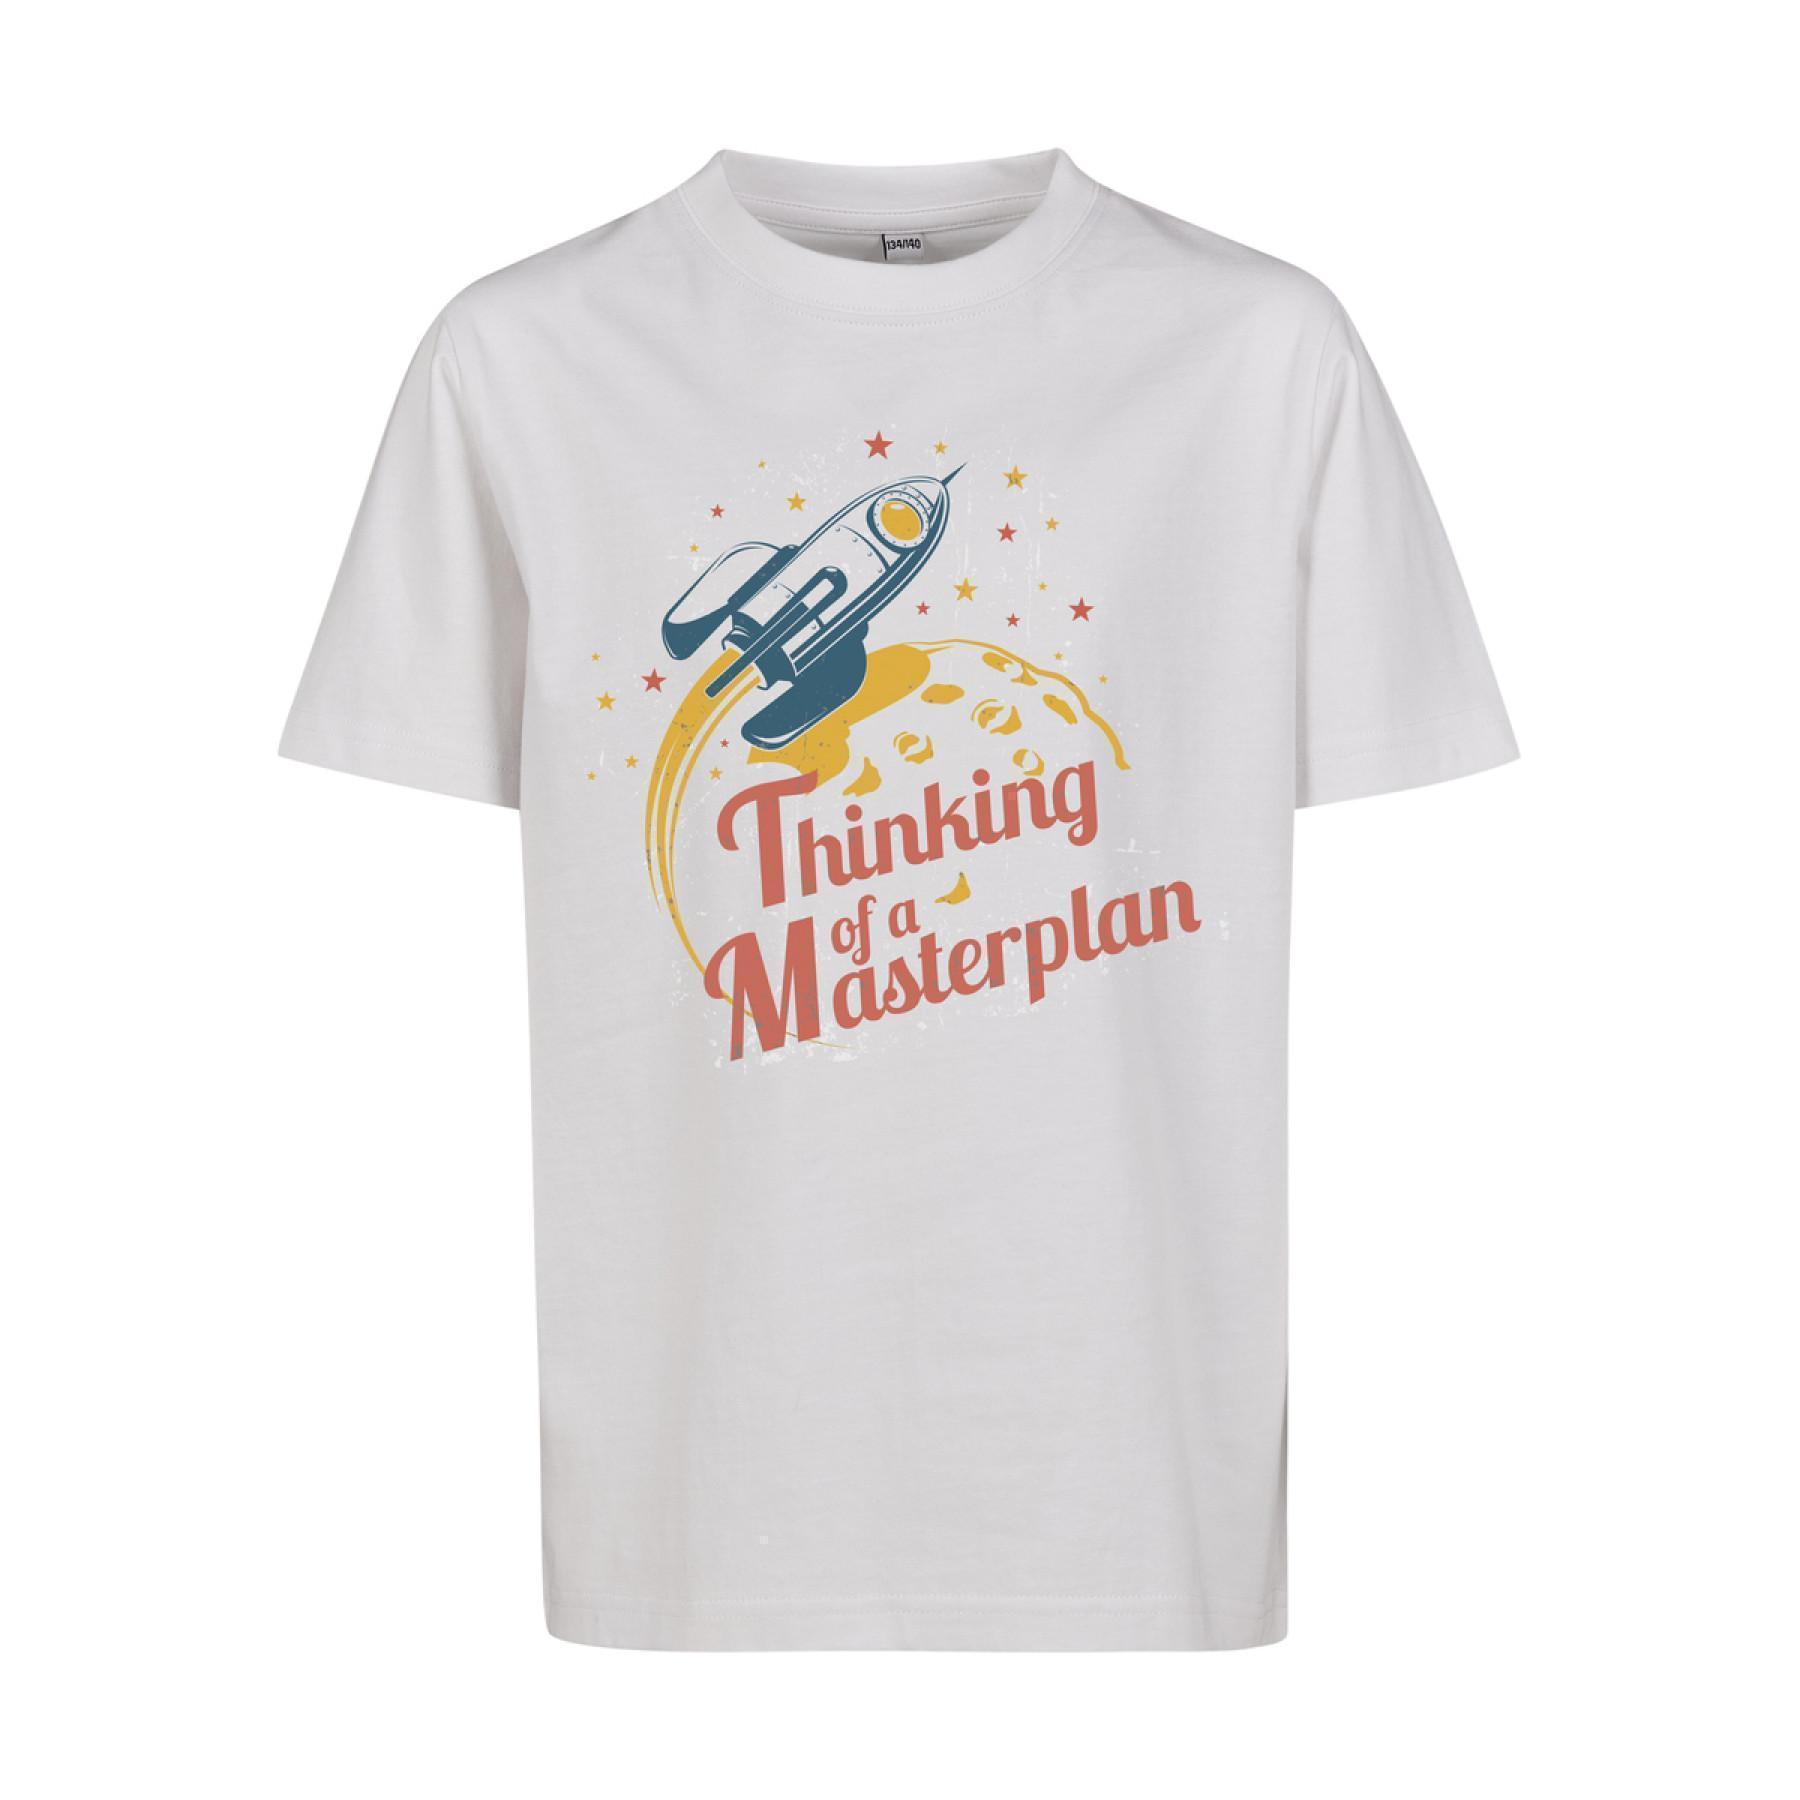 Child's T-shirt Mister Tee thinking of a masterplan